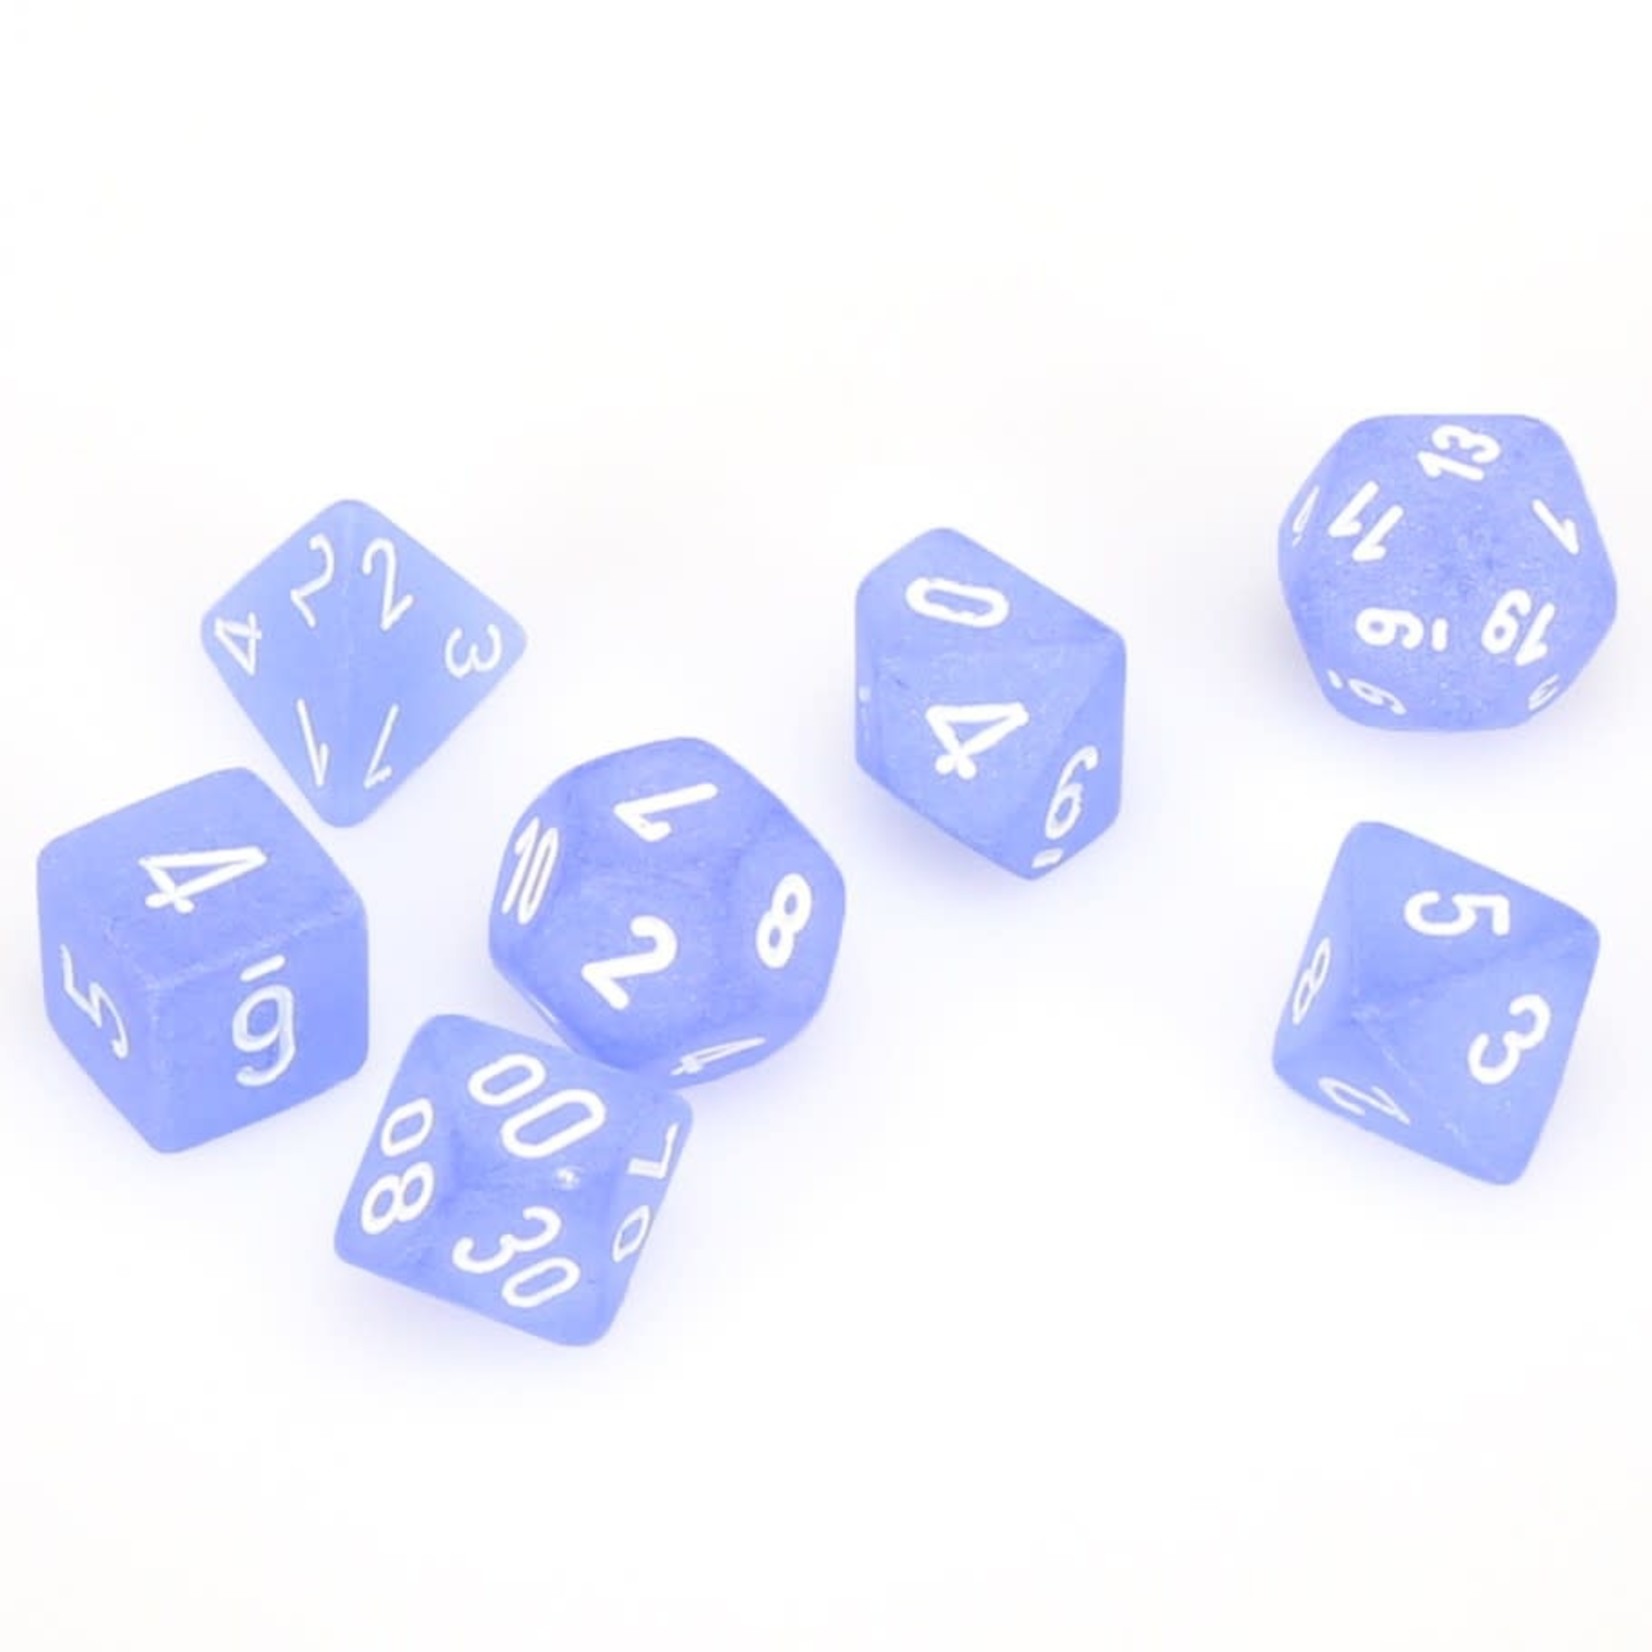 Chessex Chessex Frosted Blue with White Polyhedral 7 die set